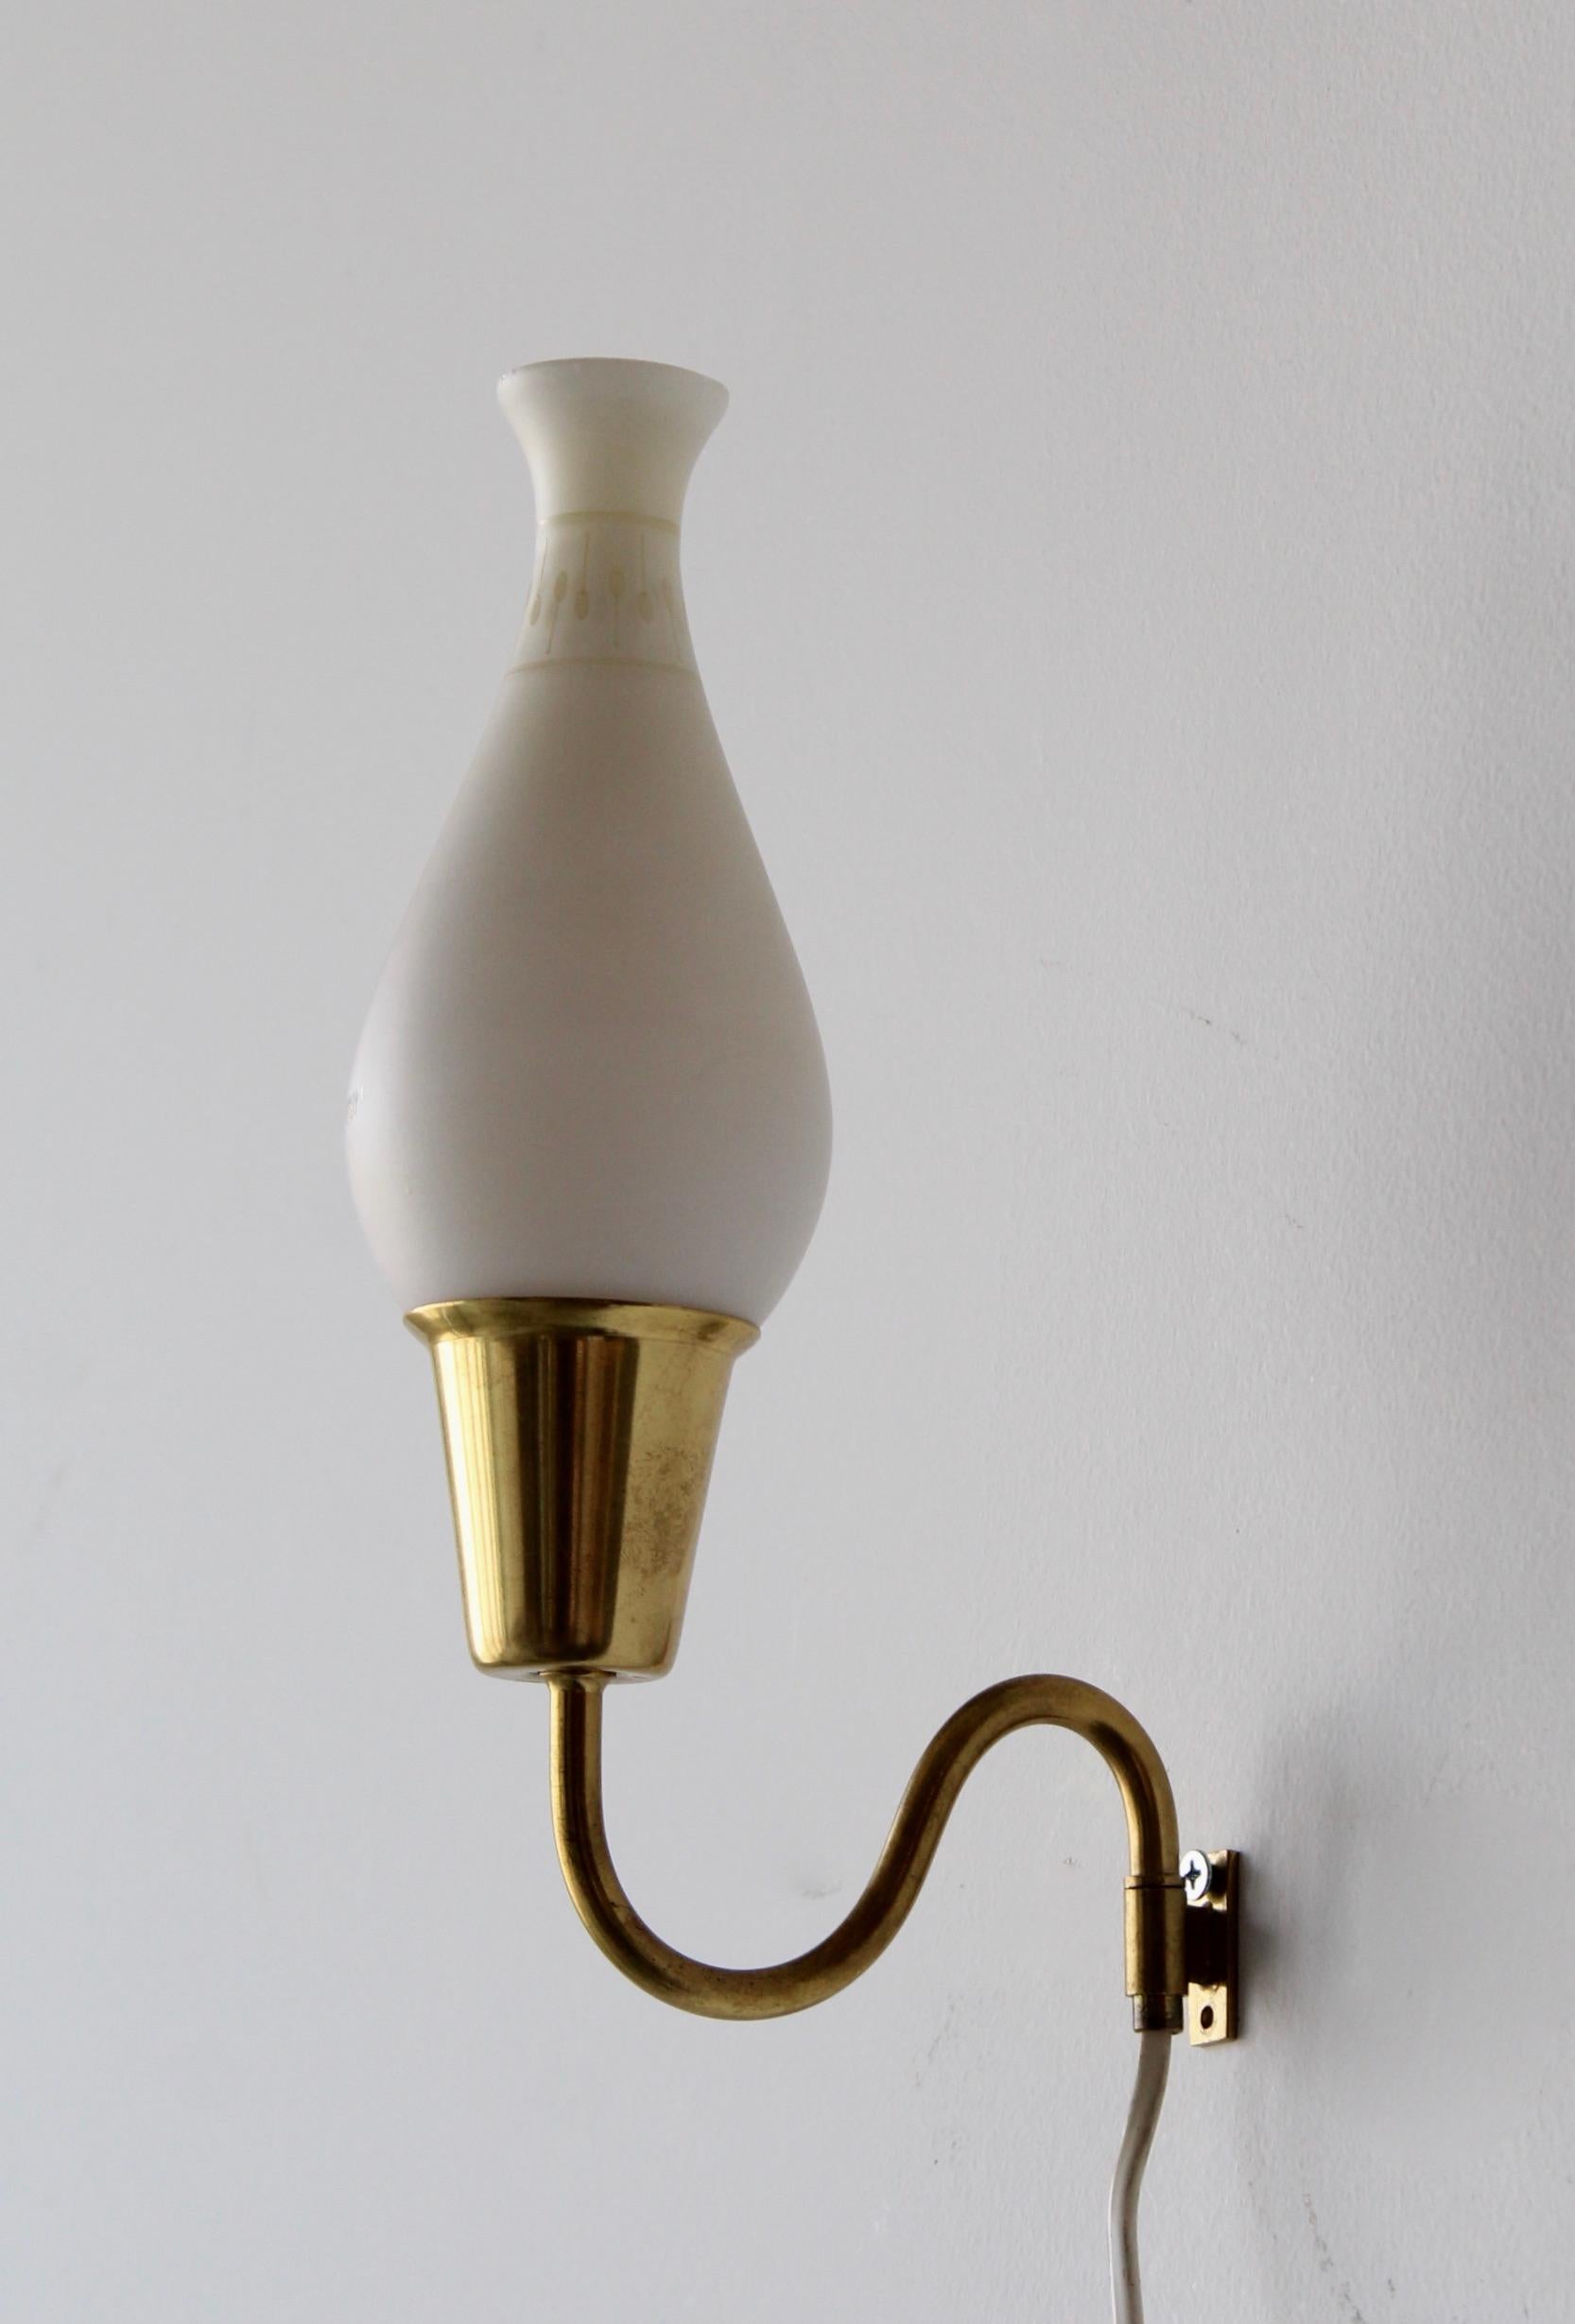 A pair of wall lights / sconces. Designed and produced in Sweden, 1940s-1950s.

Configured for plug in. Needs to be rewired for clients specifications.

Other designers of the period include Paavo Tynell, Jean Royère, Hans Bergström, Hans-Agne